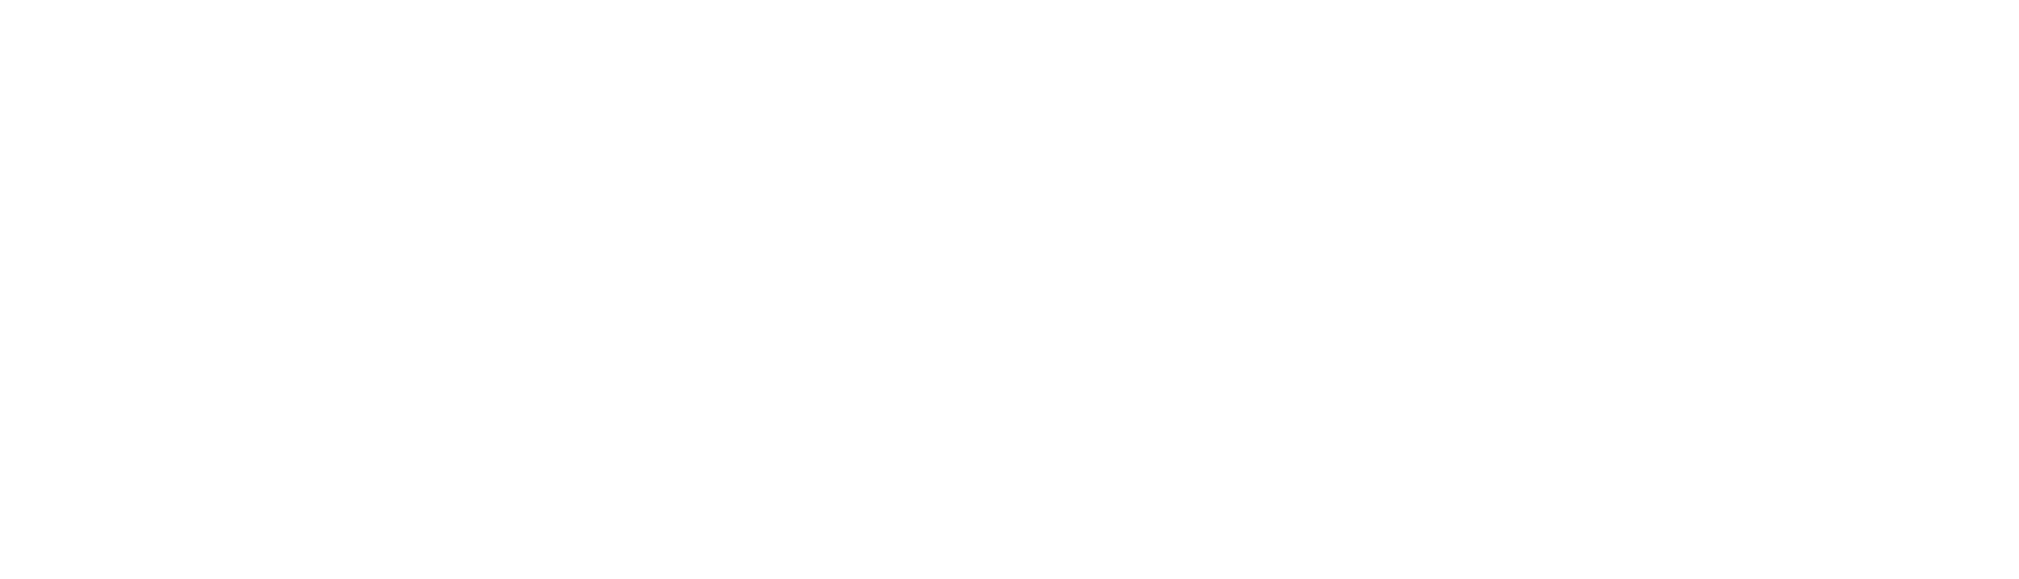 Perth Business Support